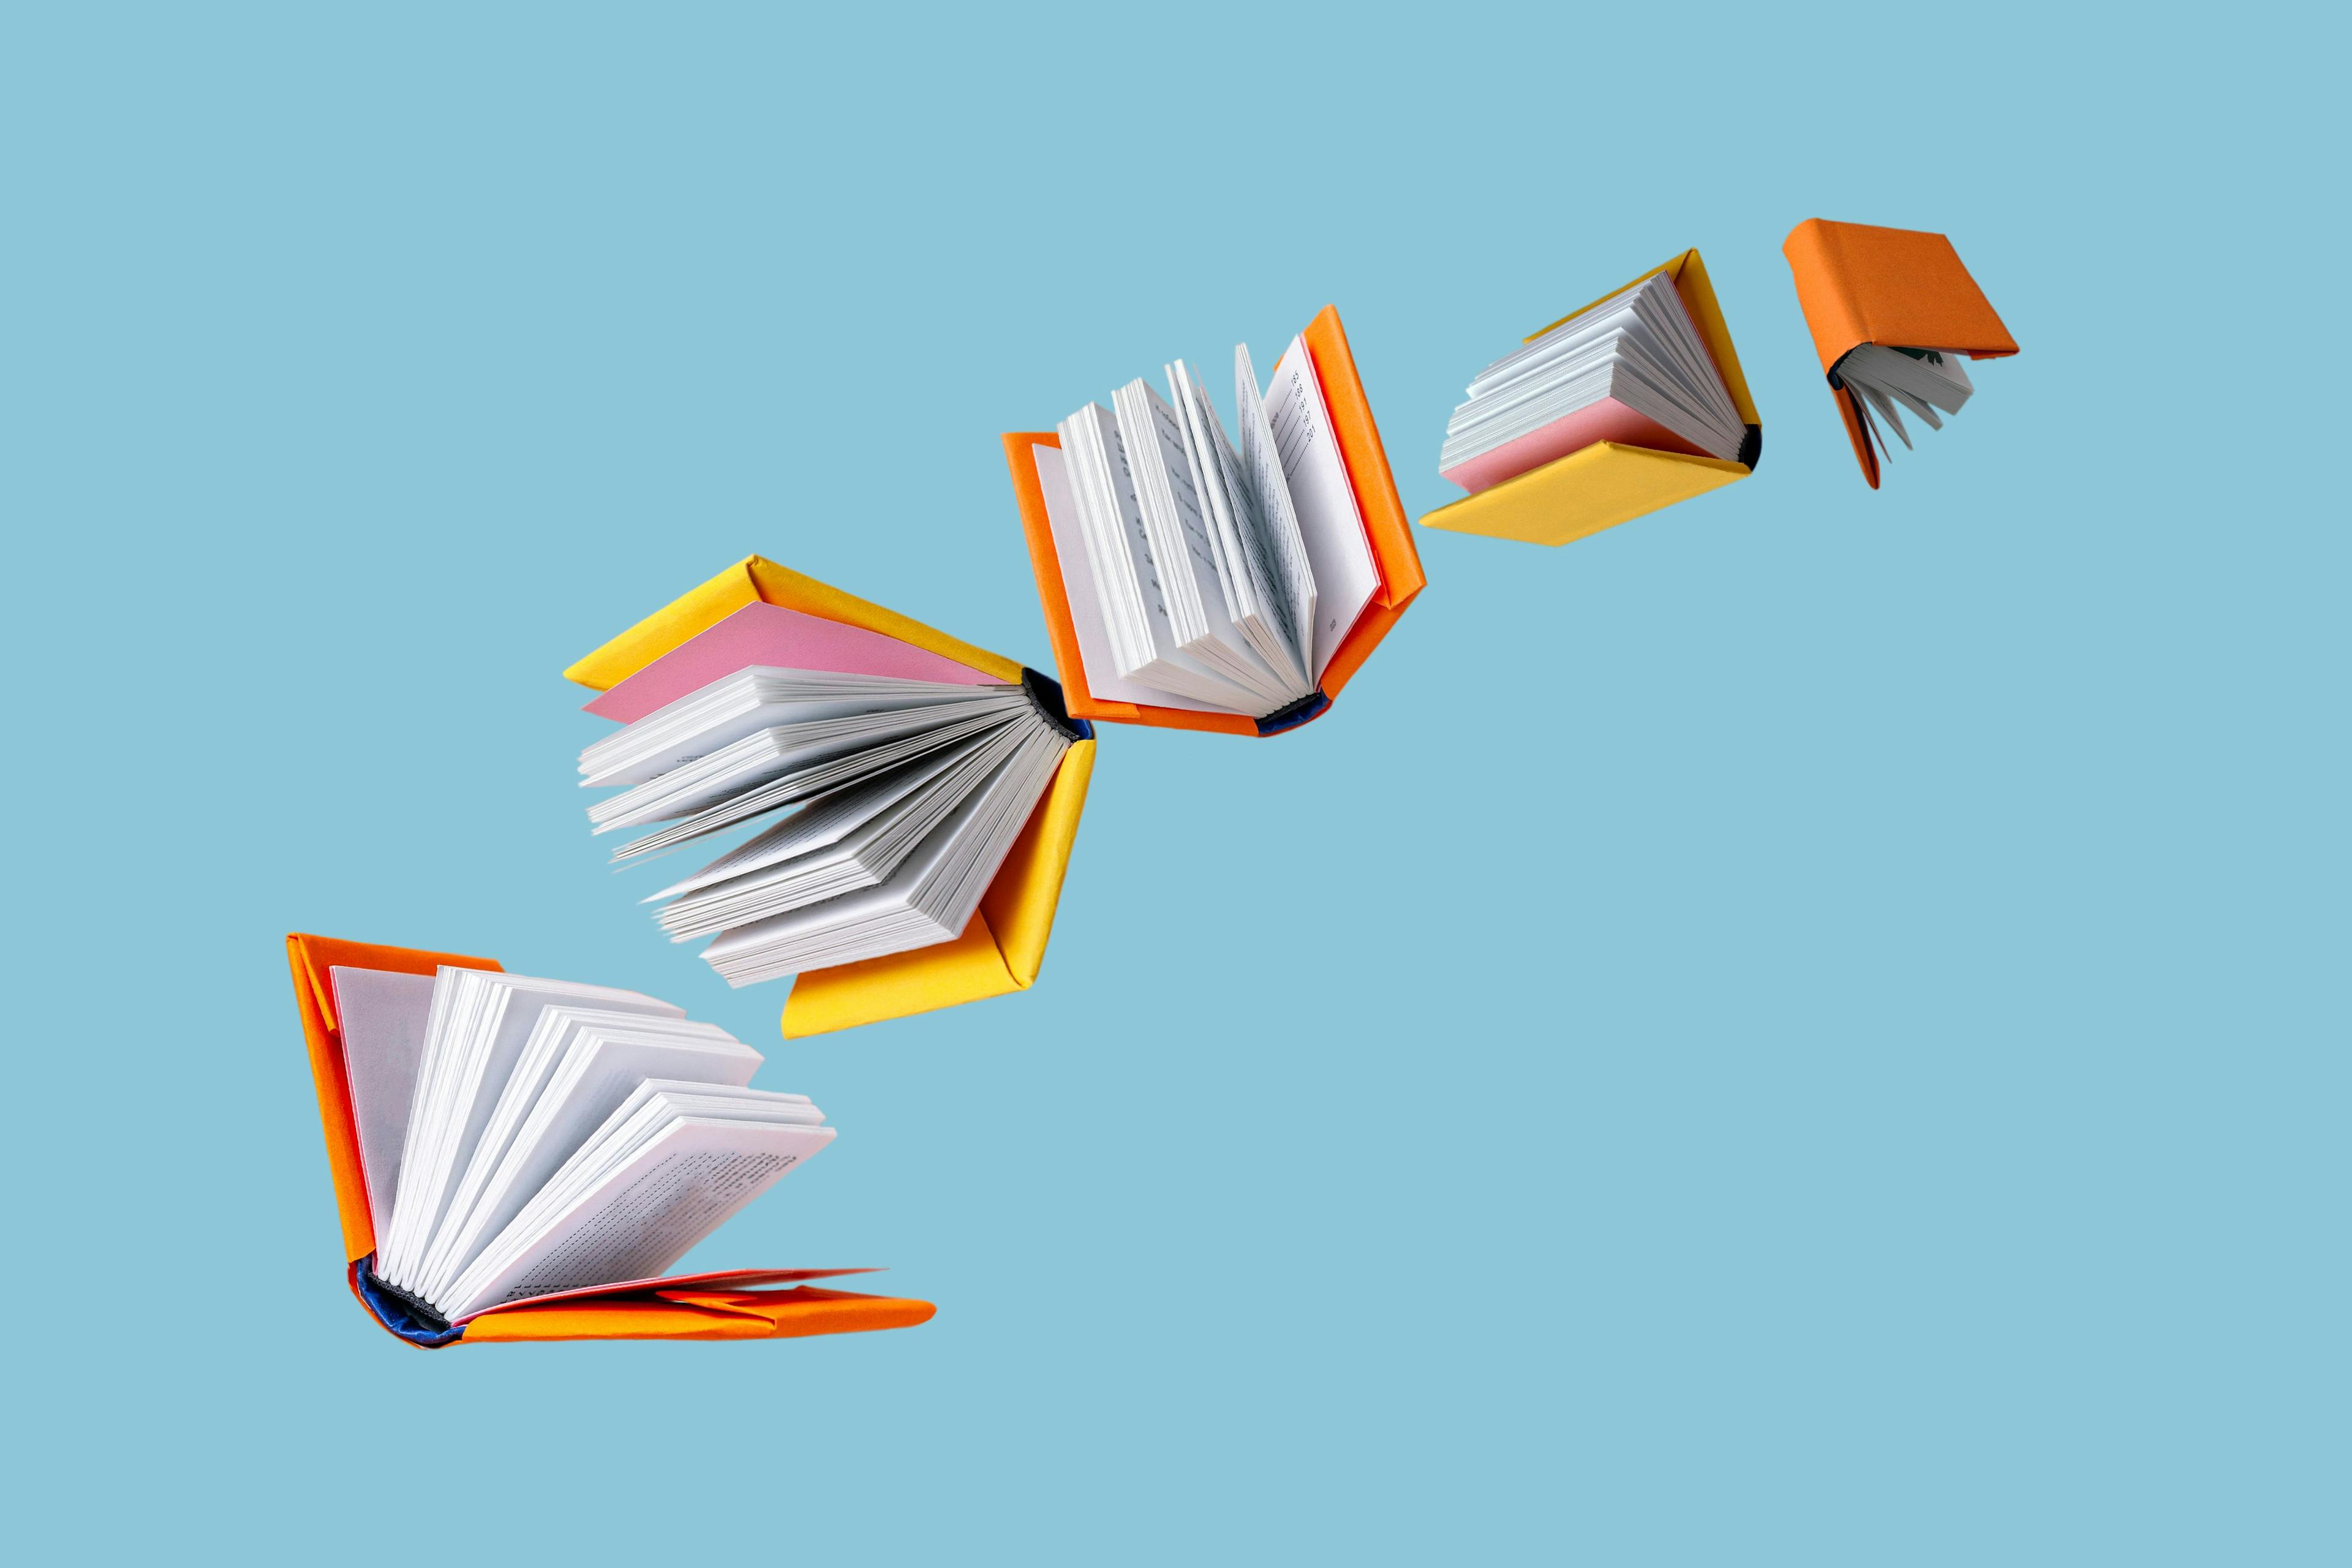 Books in colored covers swirl on a blue background, copy space | Image Credit: © Rara - stock.adobe.com